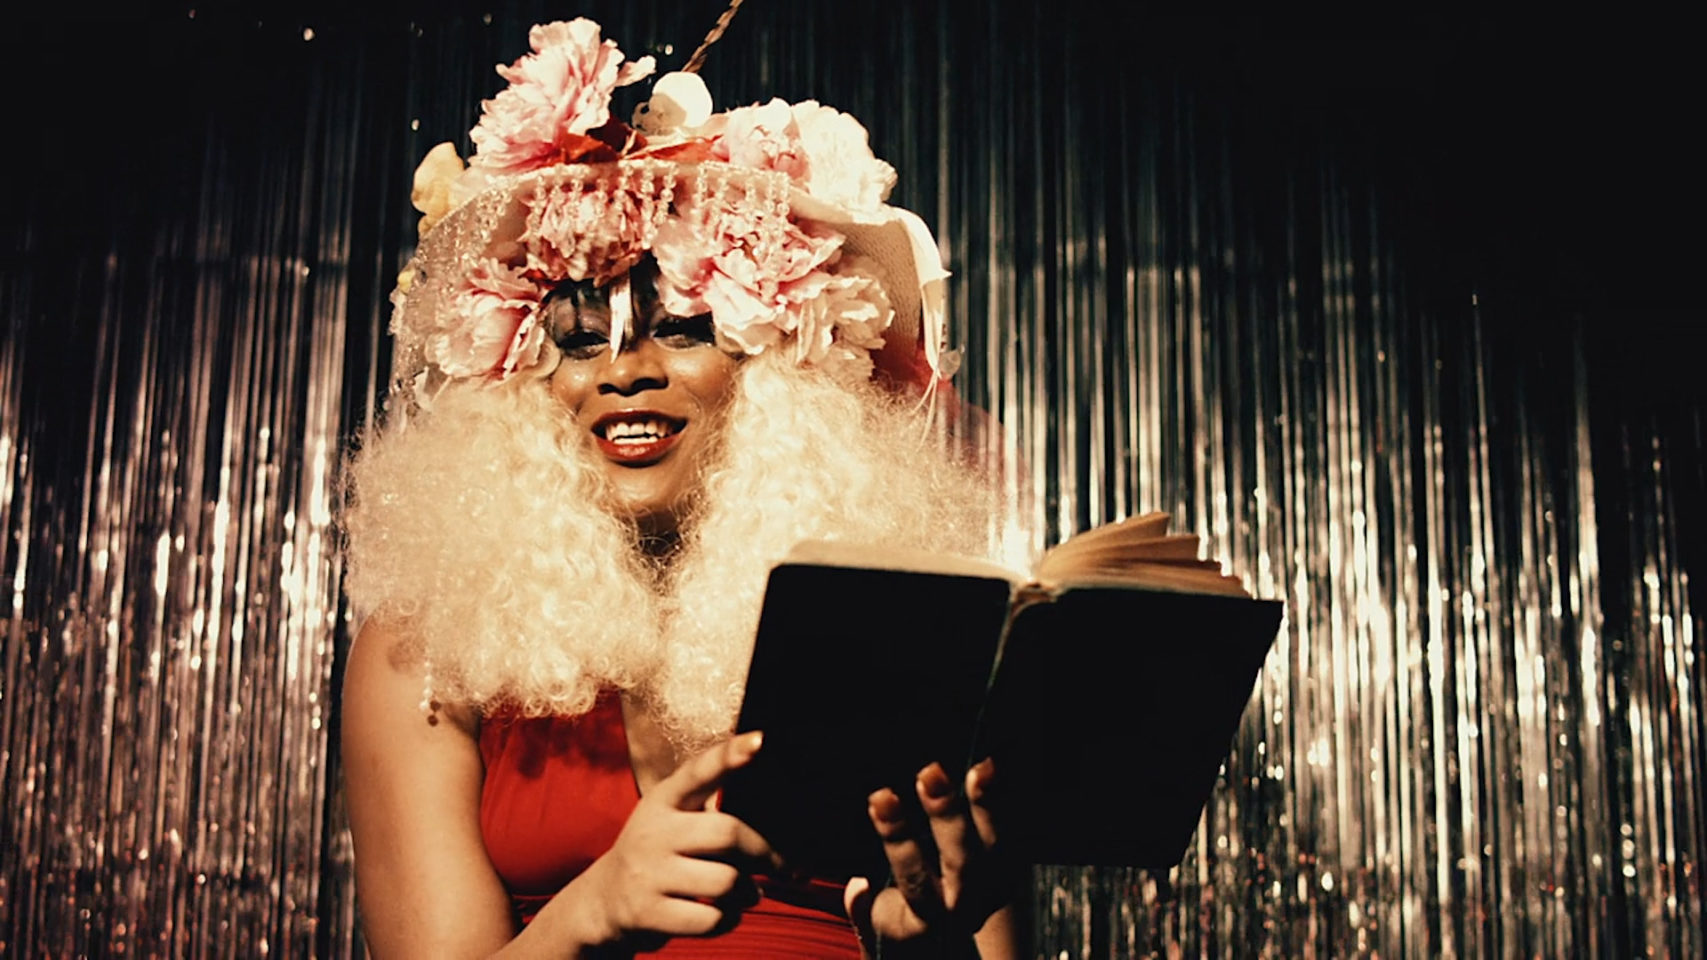 A still from a film with transgender rights activist Martha P Johnson wearing a red dress and holding a book on a stage with a backdrop of silver sparkly curtains